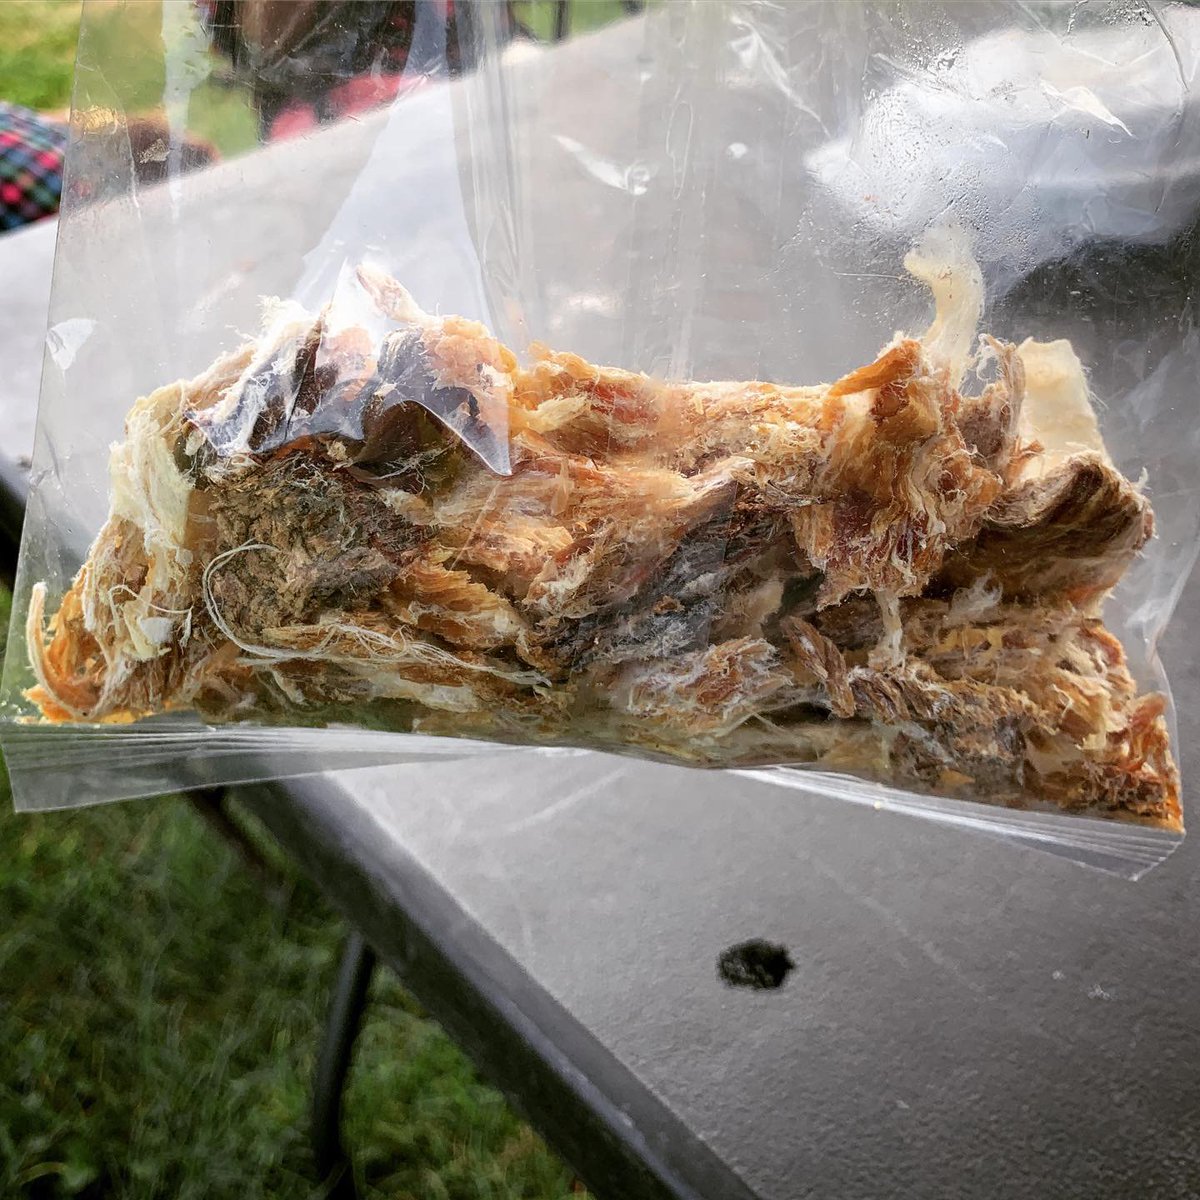 In case you're wondering, here's the dried mountain lion meat we tasted in Nacimiento. Mountain lions are magnificent and I certainly do not, under any circumstances, advocate killing them. Also, they taste bad. But the Sierra Madres are beautiful. 11/12